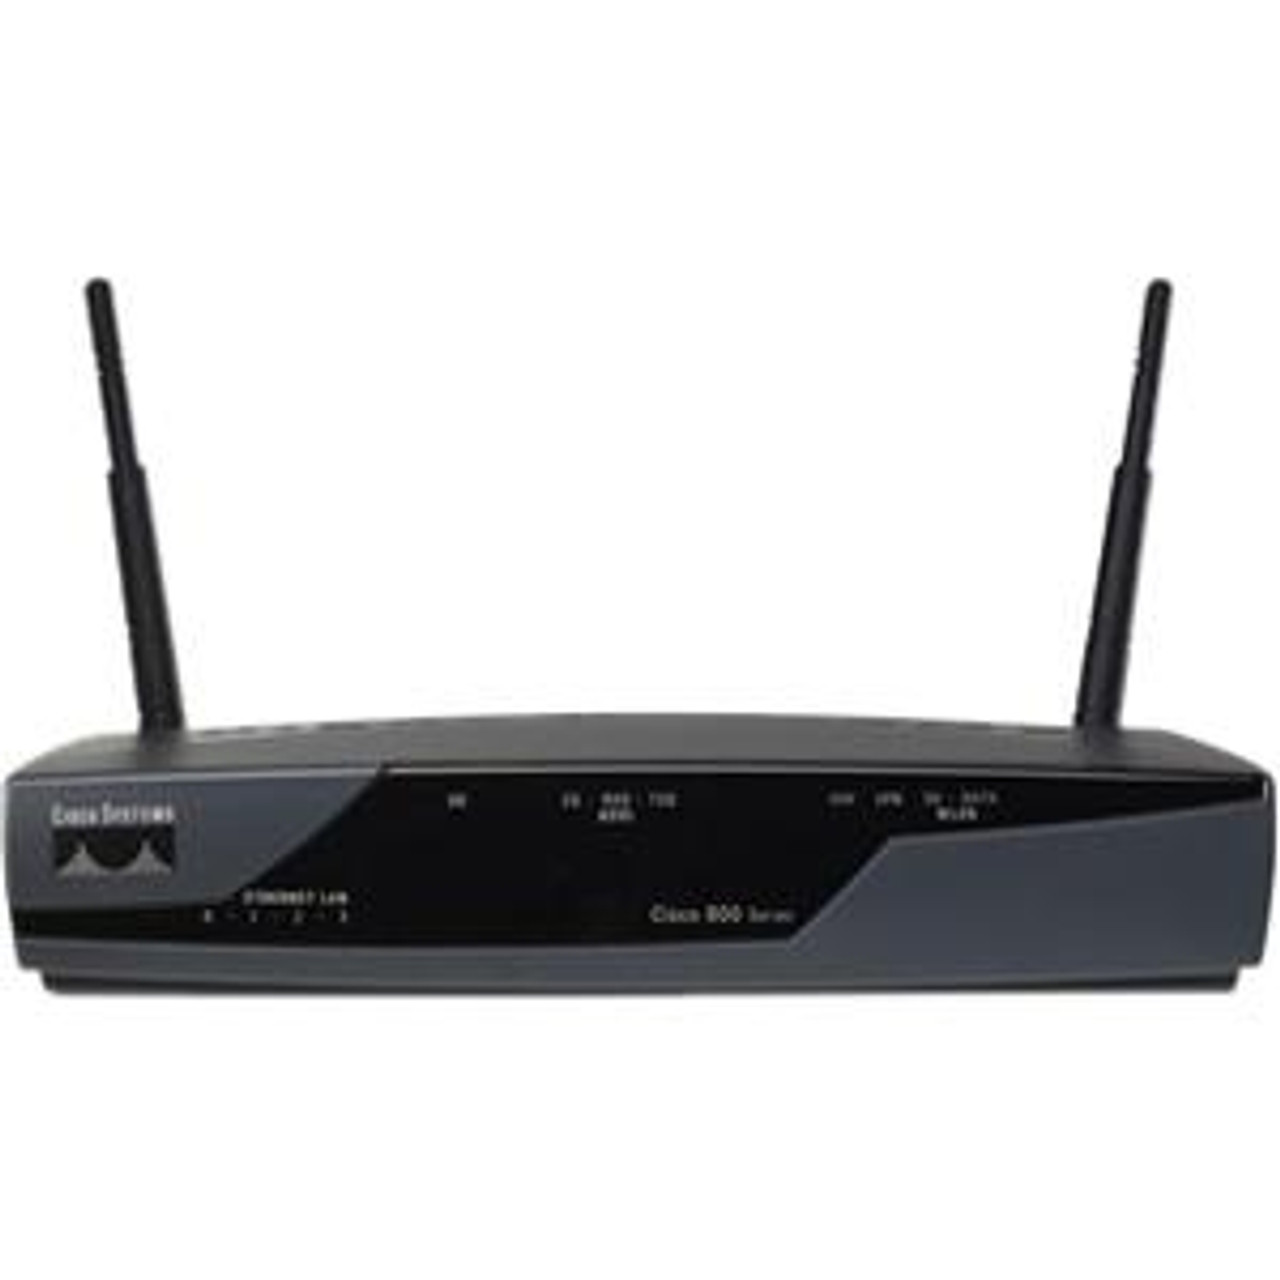 CISCO877W-G-E-K9 - Cisco ADSL Security Router with wireless 802.11g ETSI compliant (Refurbished)